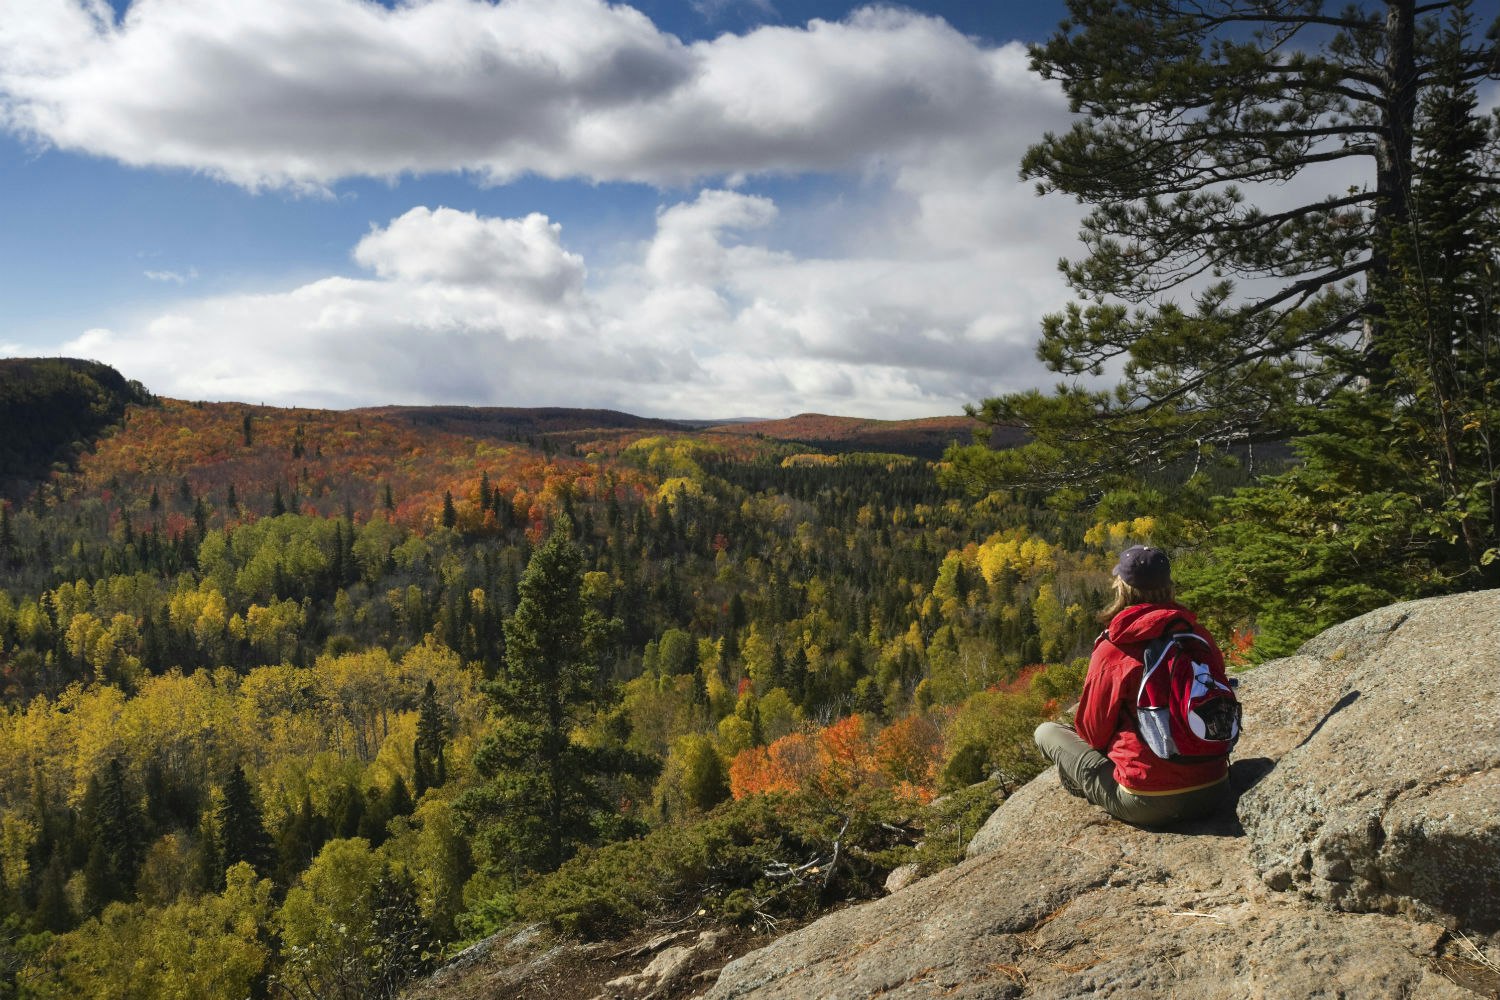 Taking in a scenic autumn view along the Superior Hiking Trail northeast of Duluth. Jim Kruger / E+ / Getty Images.